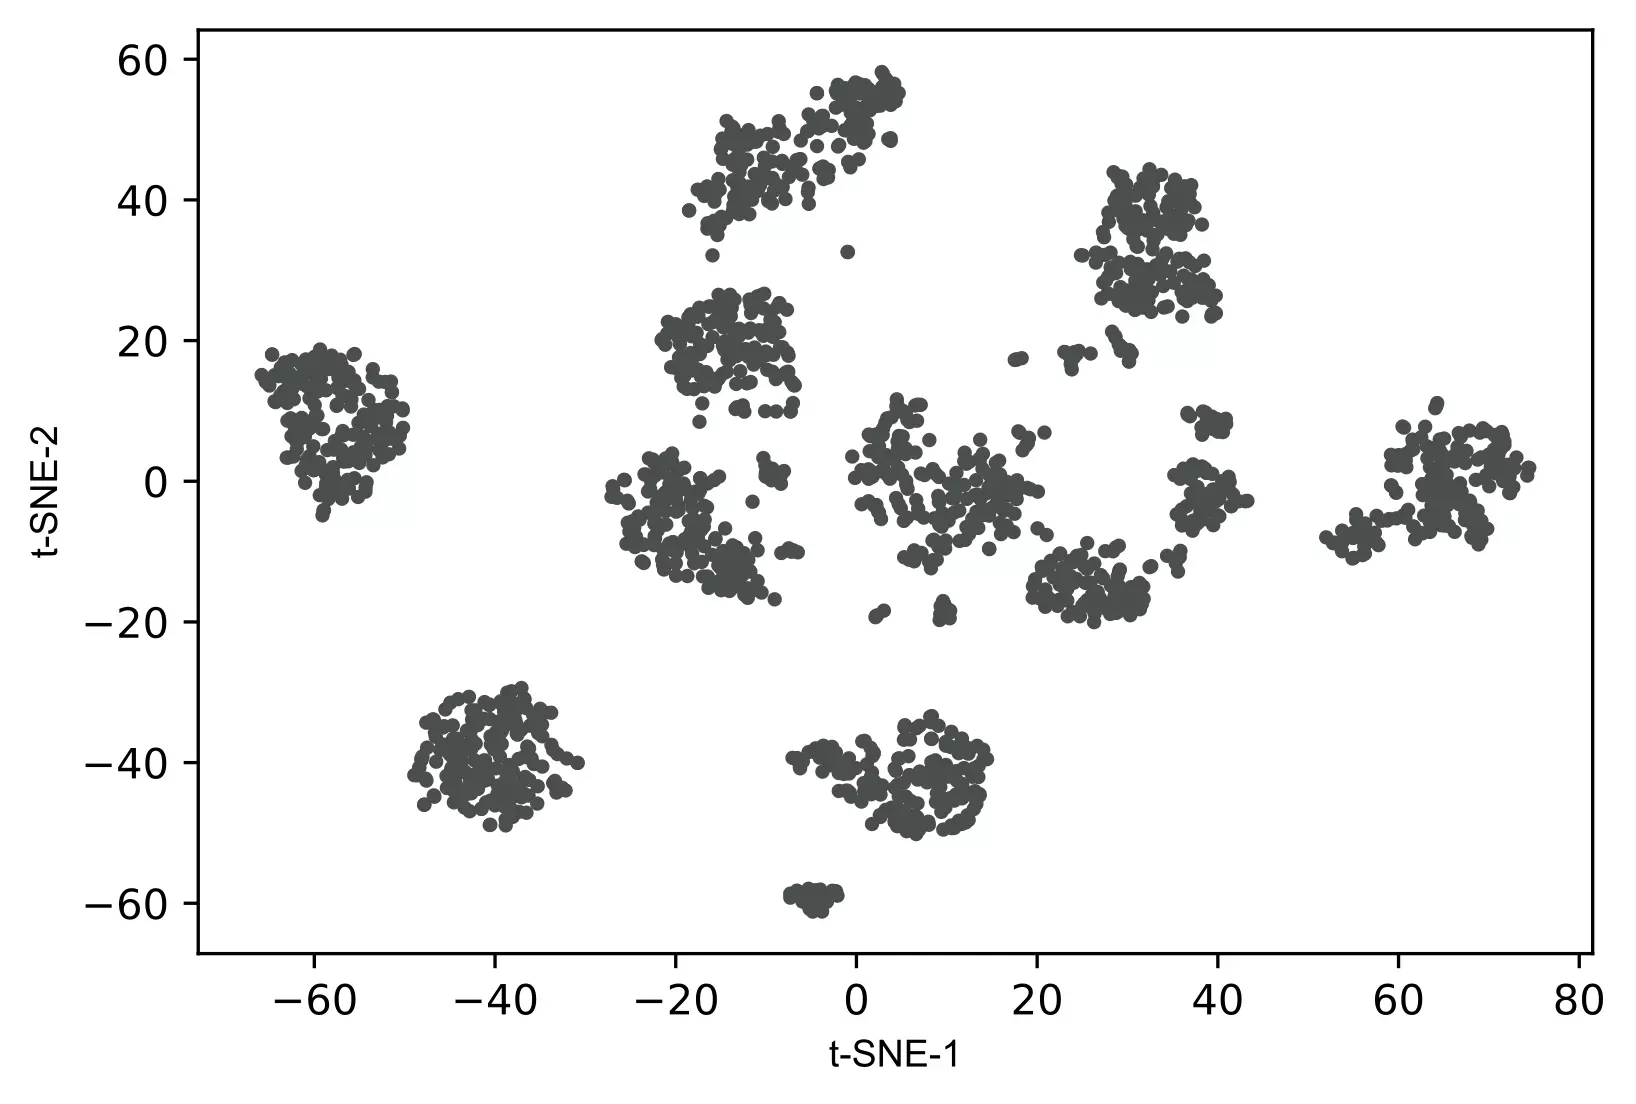 basic t-SNE plot without colors